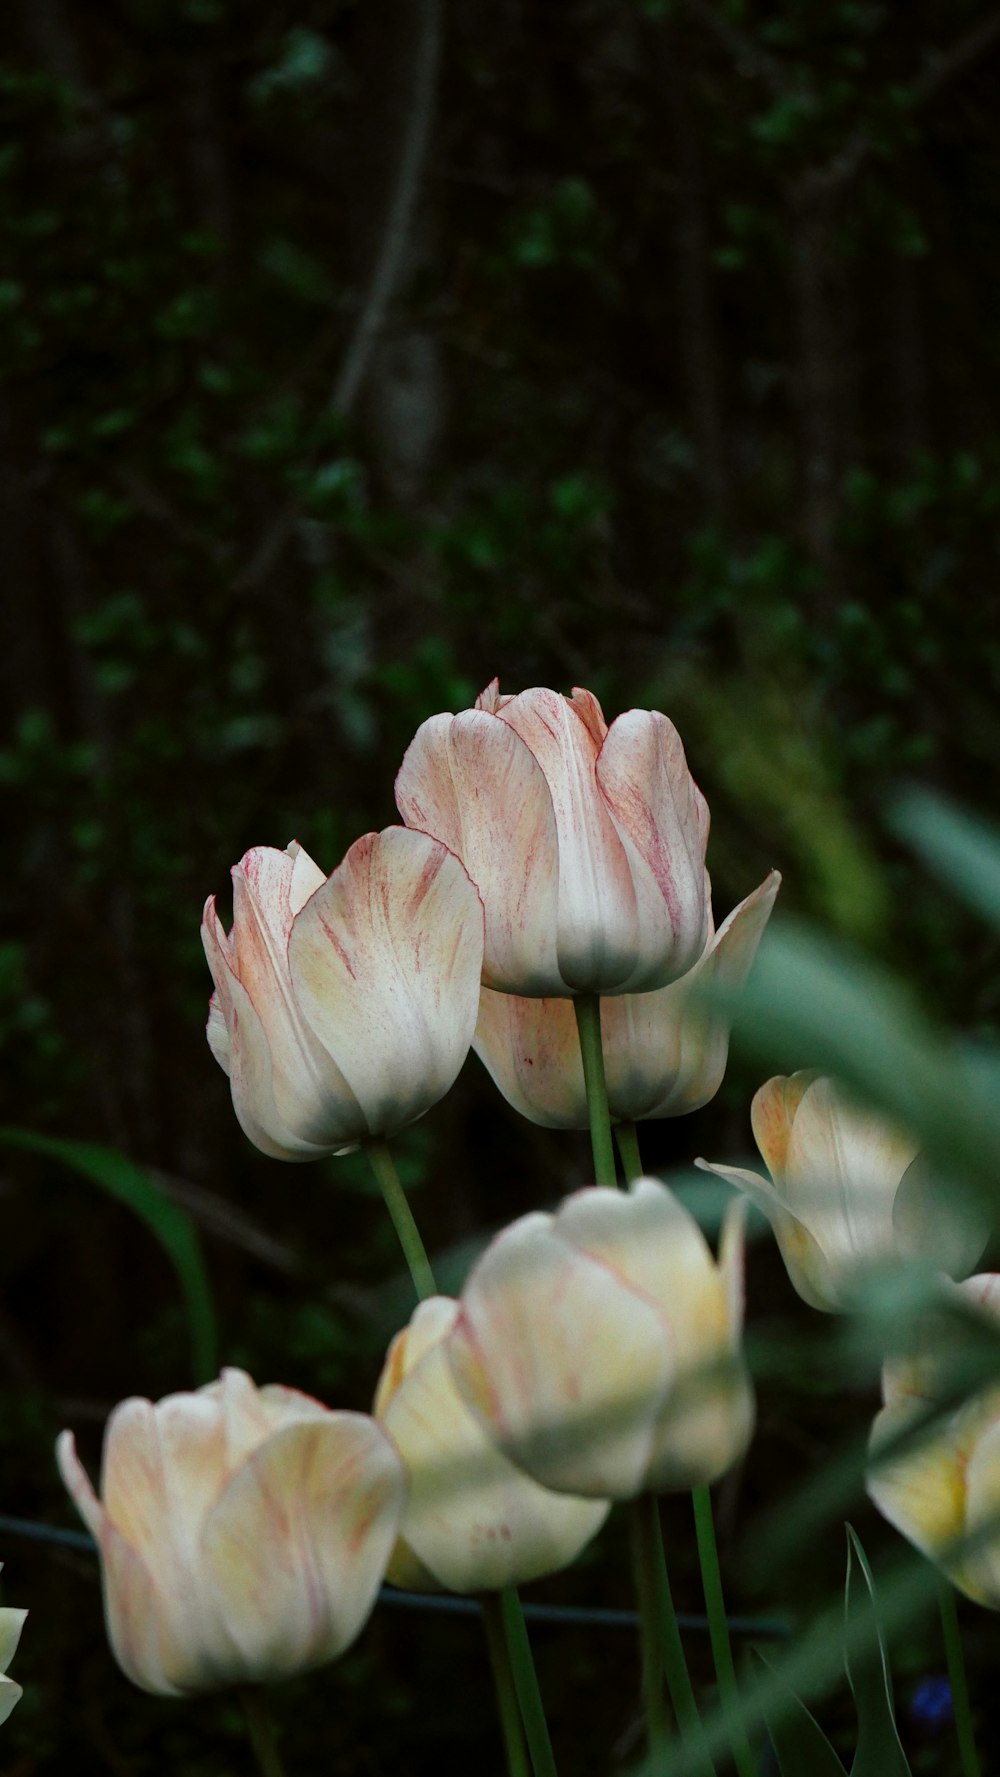 a group of pink tulips in a garden